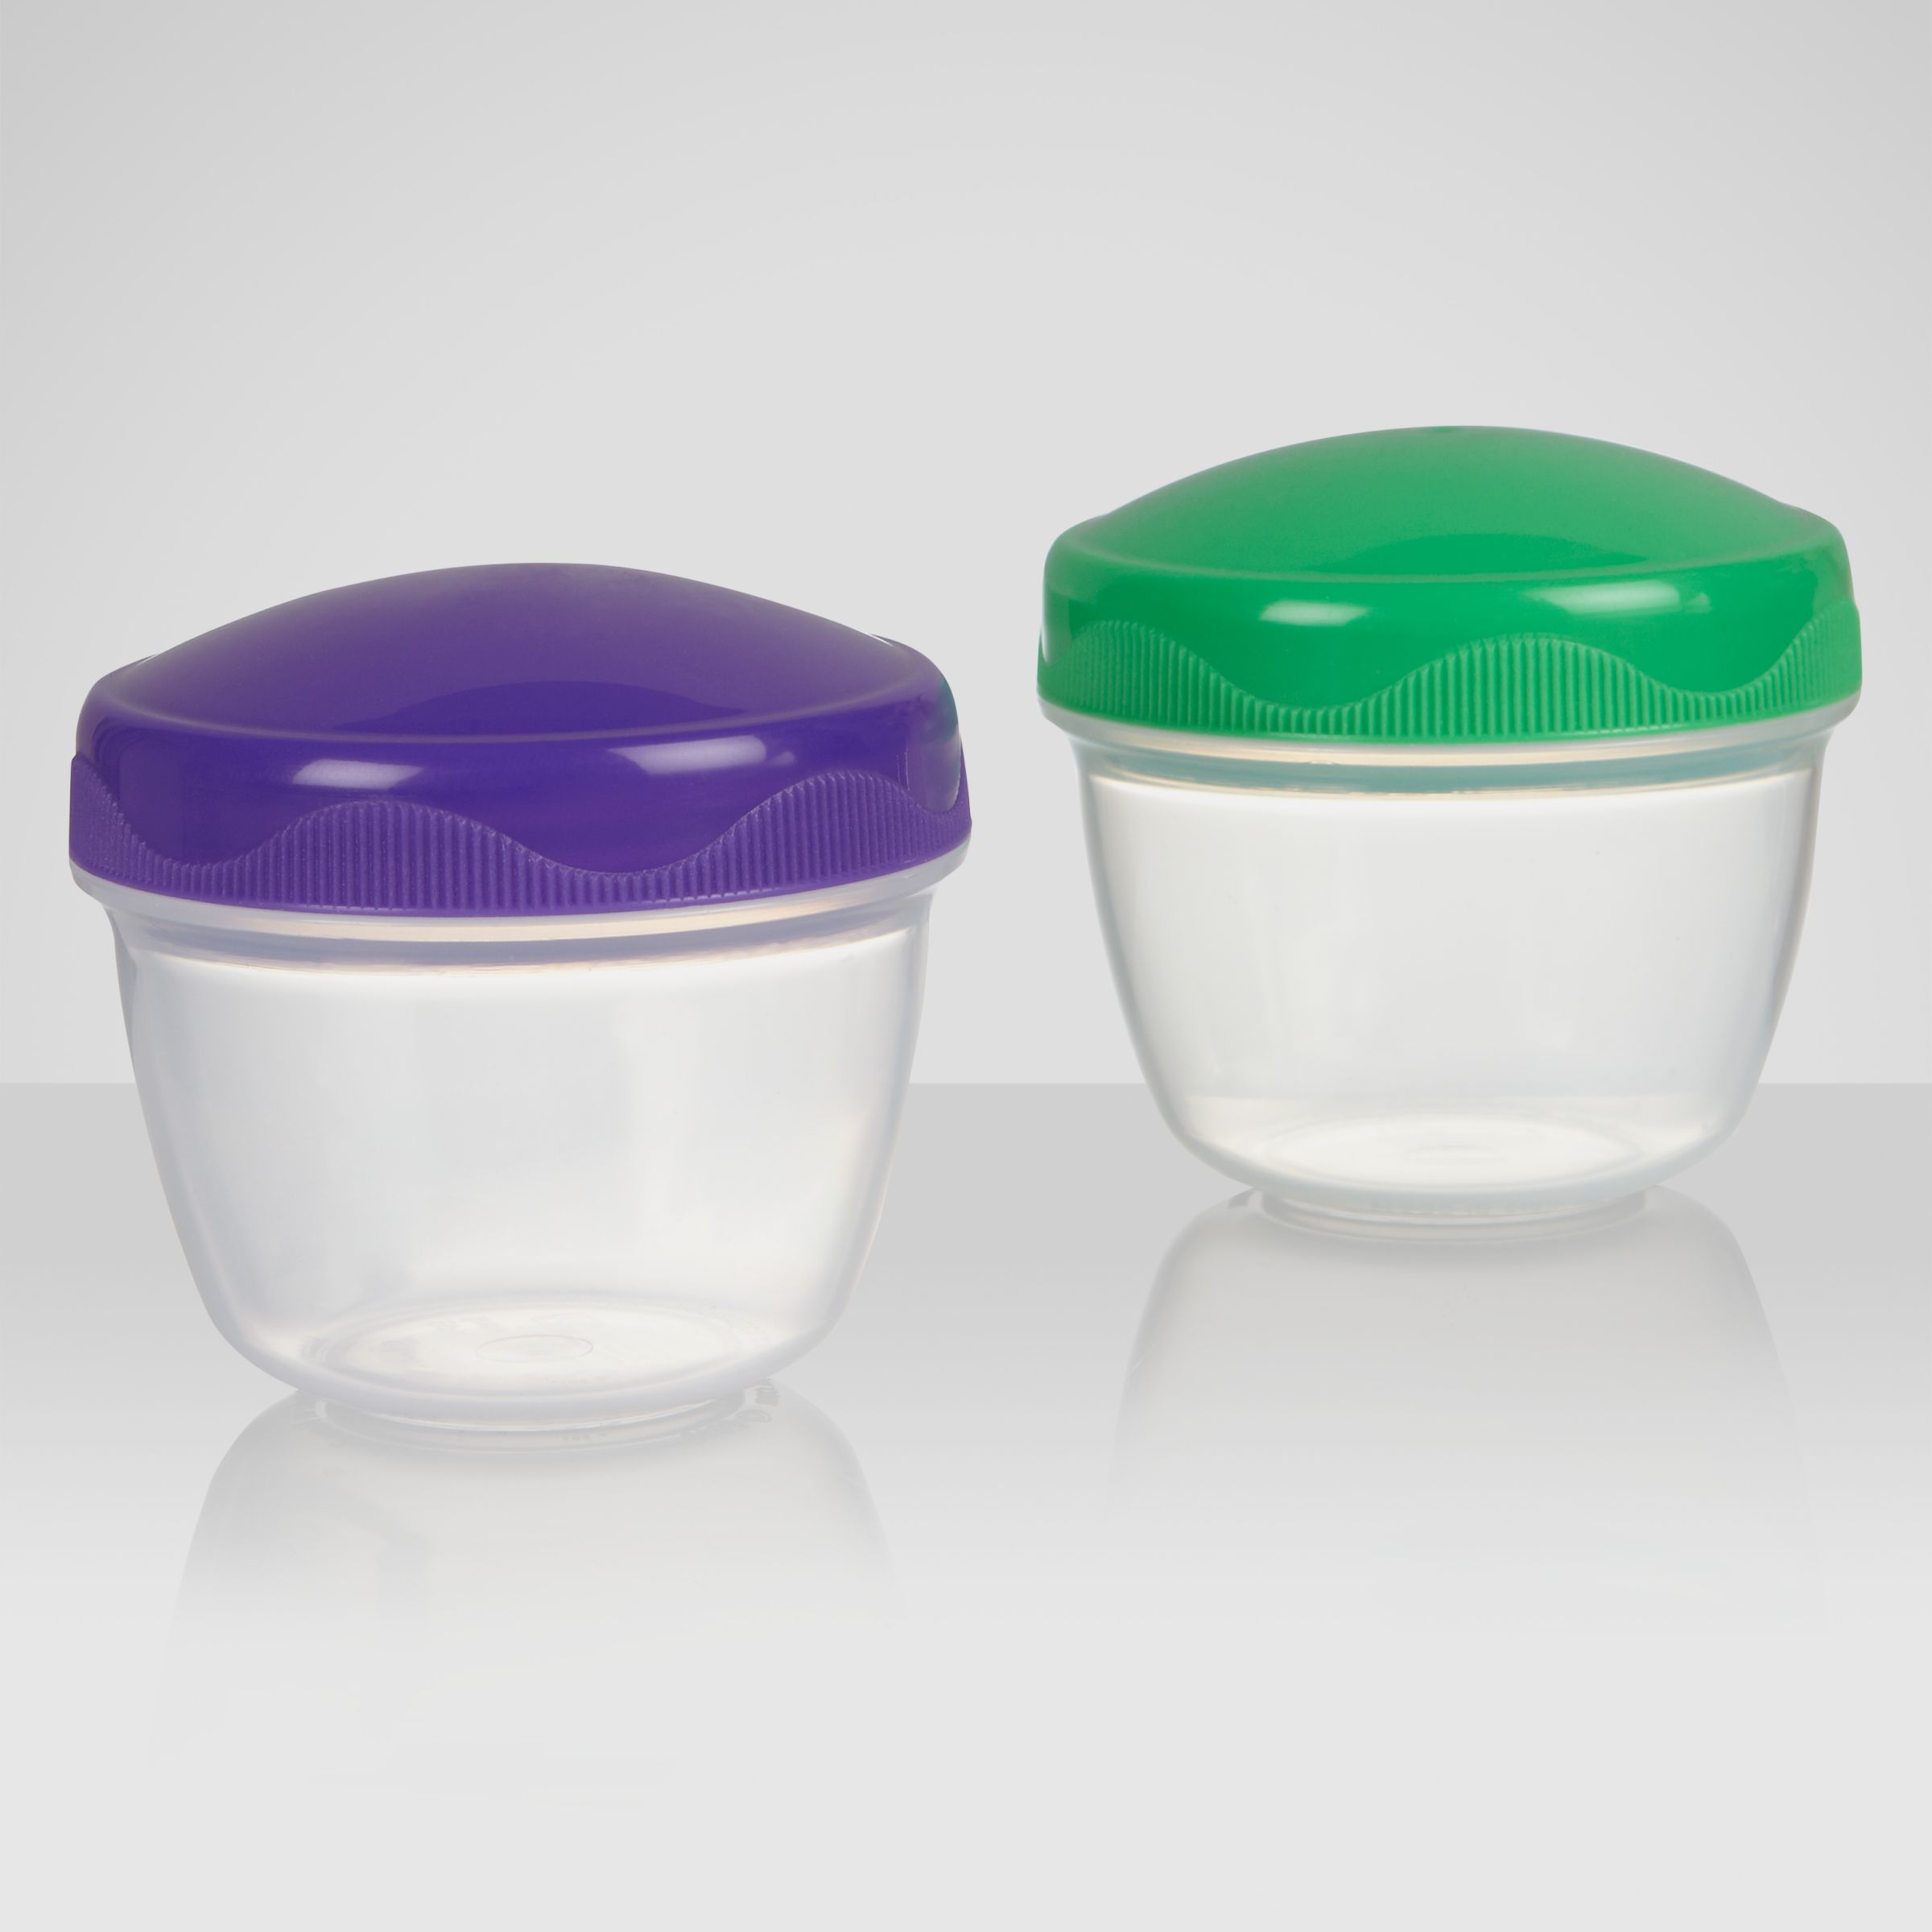 Sistema Yoghurt To Go Containers, Set of 2